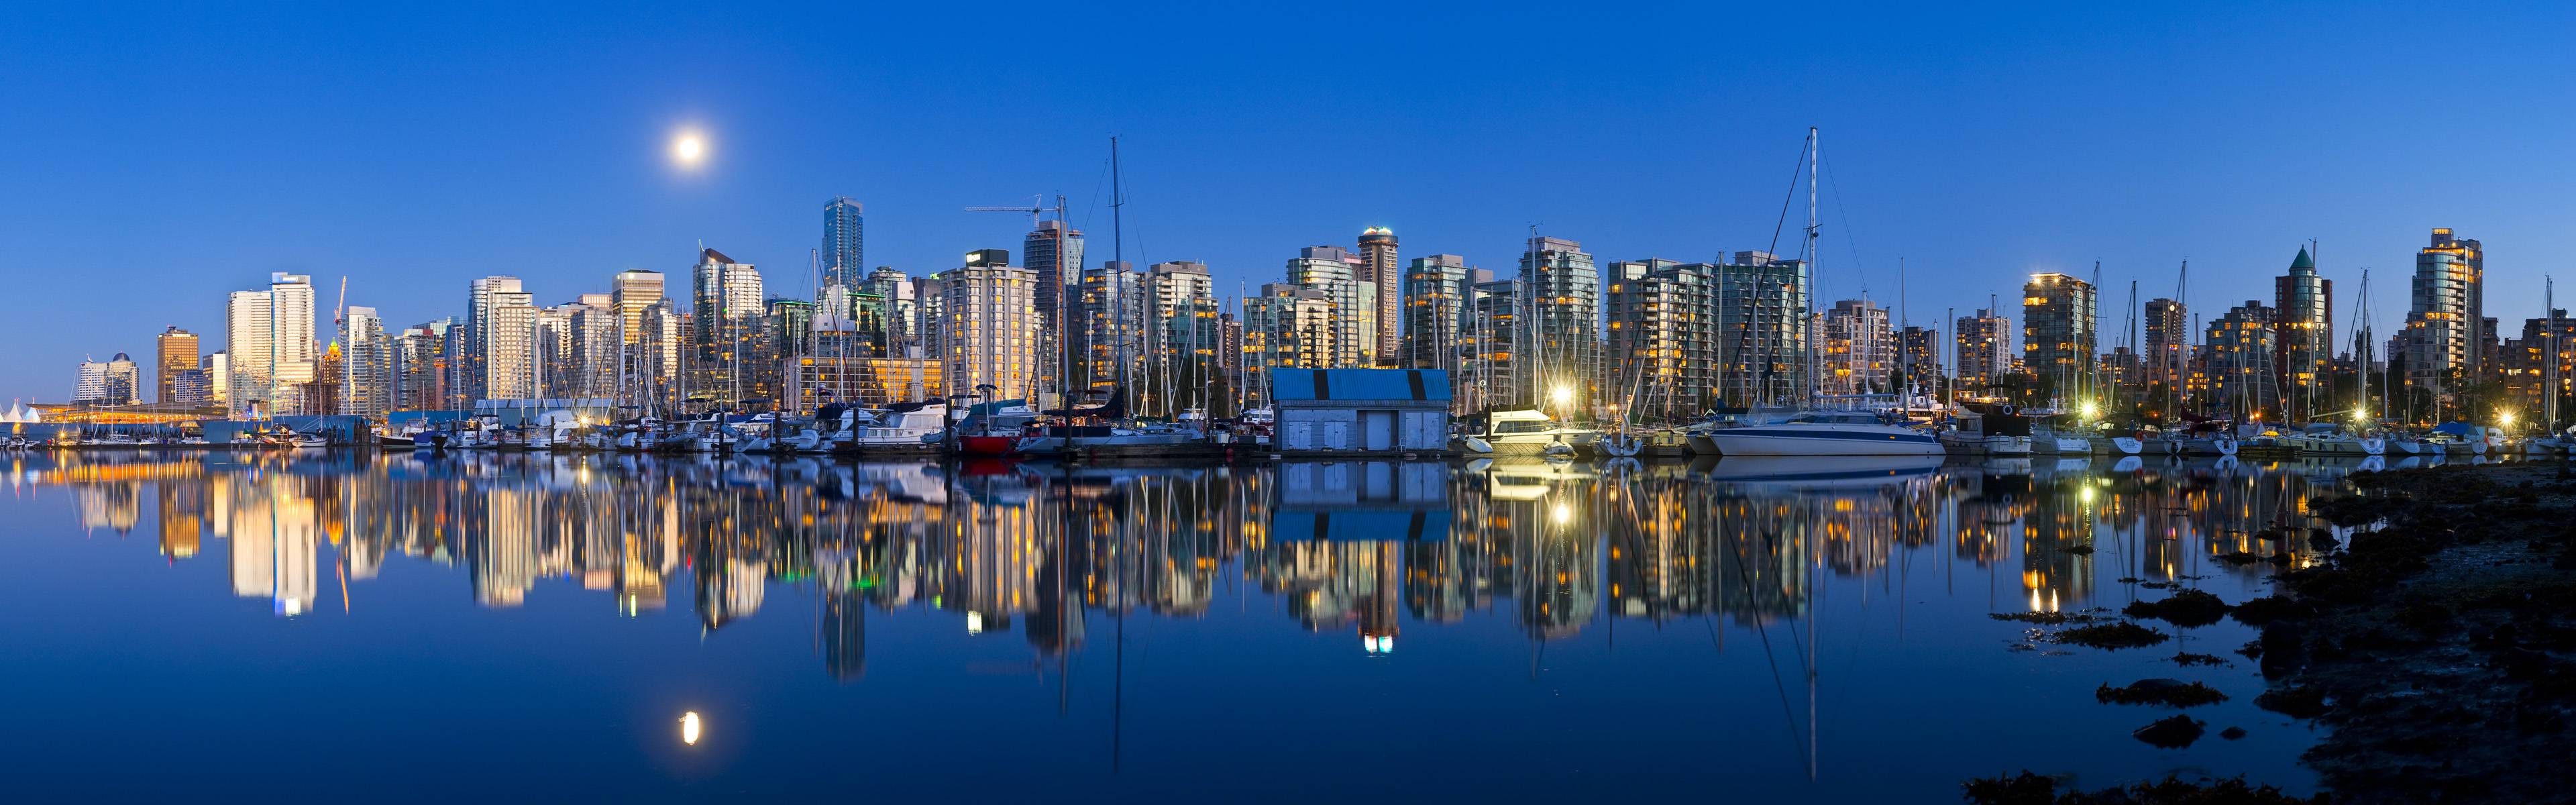 Cityscapes panoramic wallpaper theme for Windows 8   Windows 8